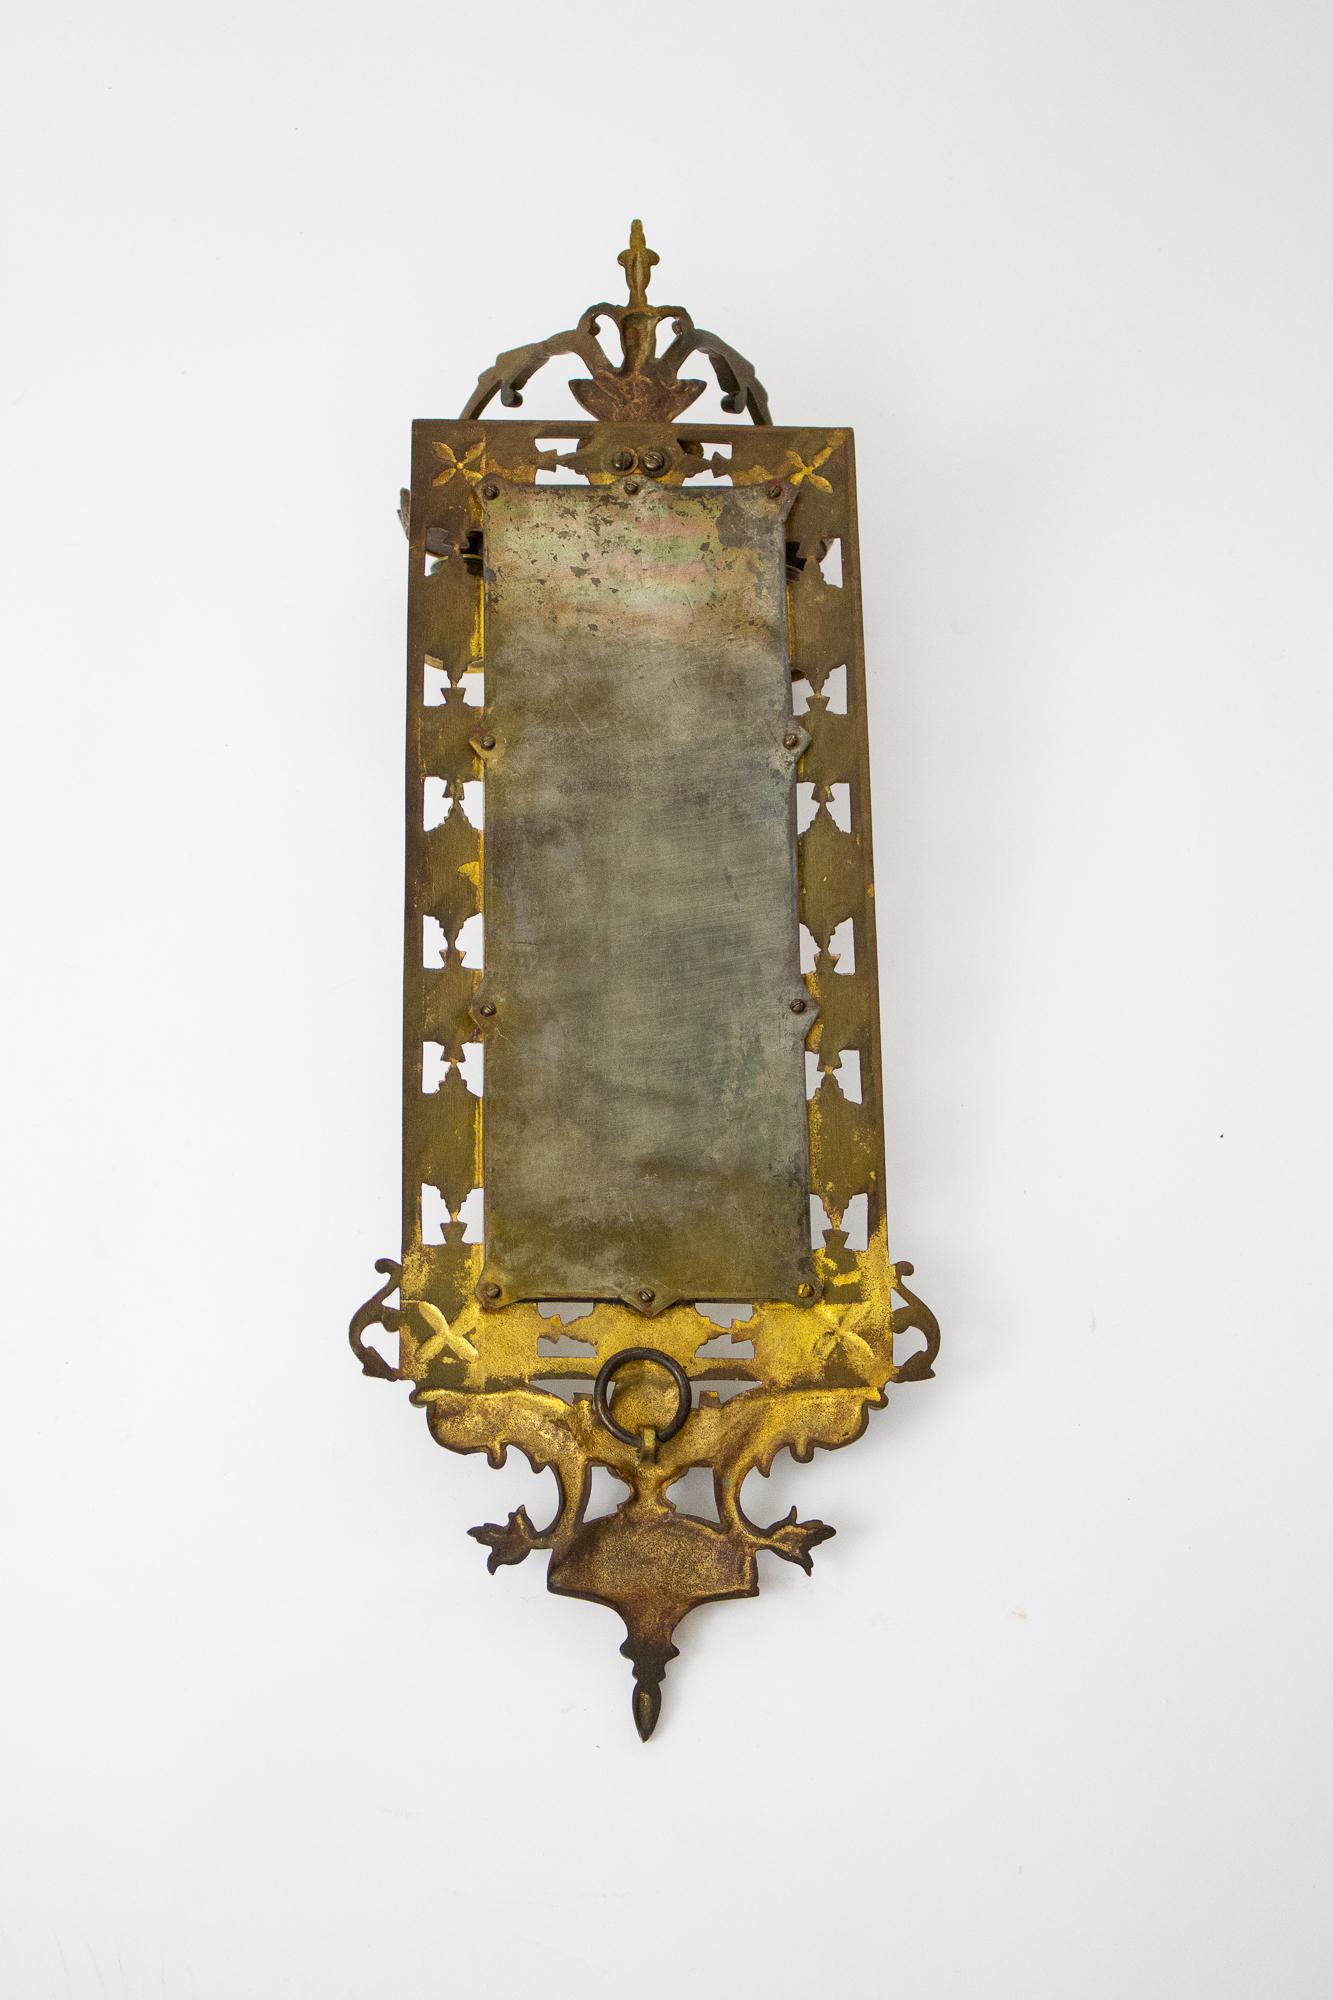 A classic mirrored sconce, rectangular in form. The top ornament features two classical dolphins. Two arms at the bottom to hold taper candles. The mirror is beveled, and has age spots in the original backing. The brass has an aged patina and has